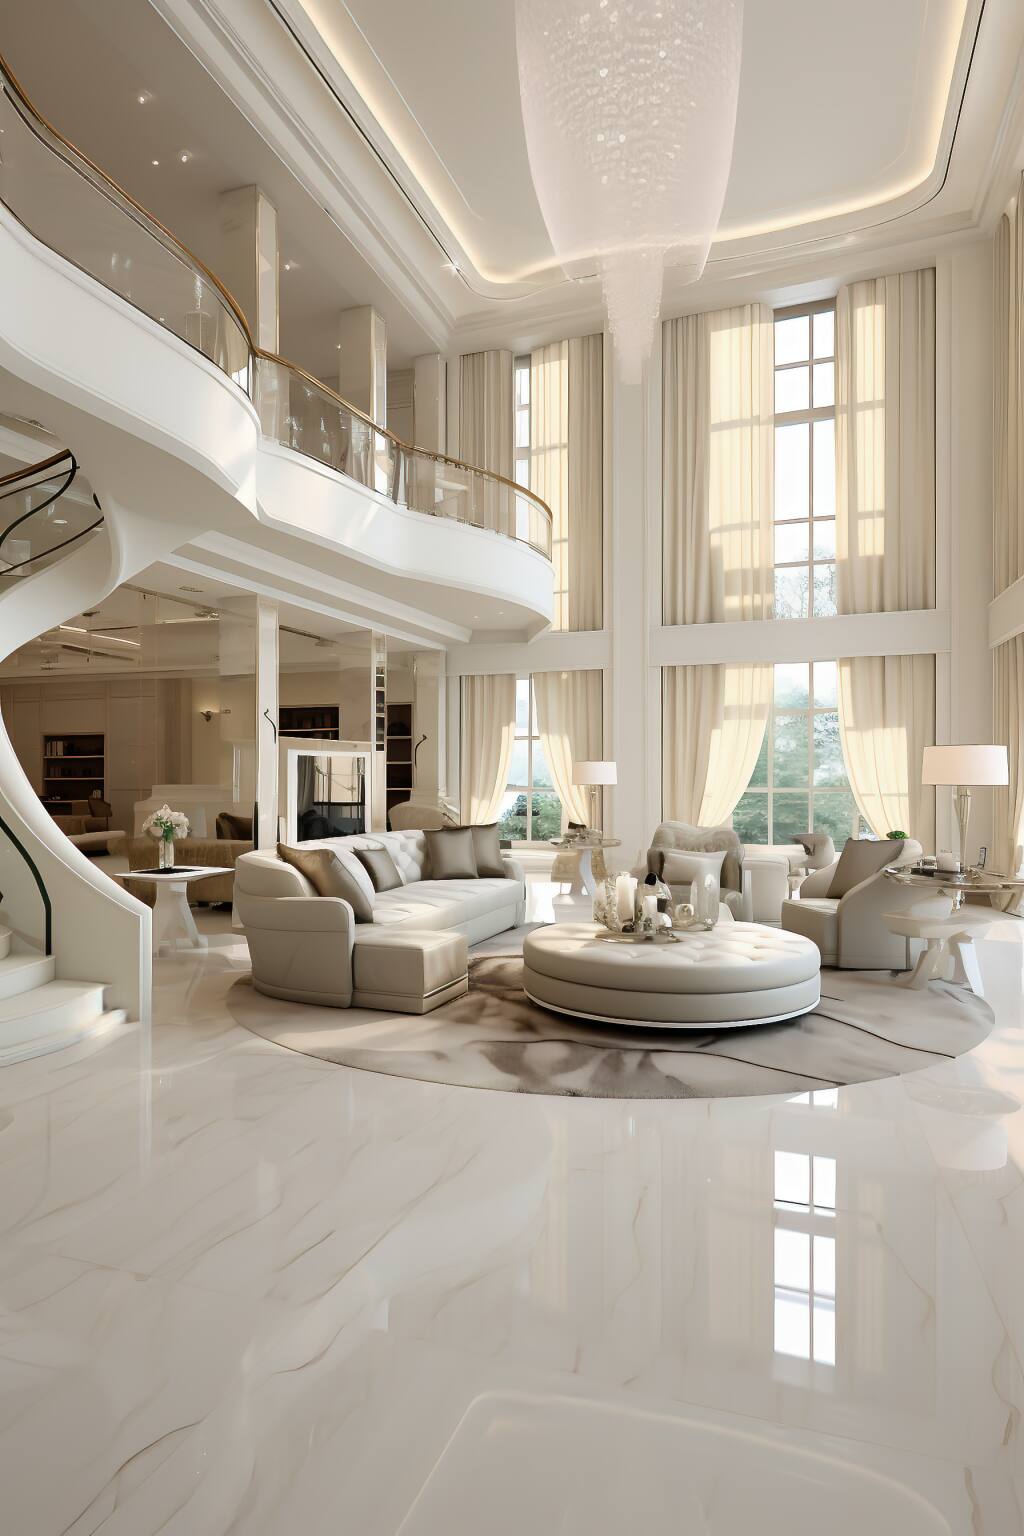 A Luxury Living Room In White And Beige, With A Central Marble Floor That Brings A Timeless Elegance To The Light-Filled, Spacious Interior.